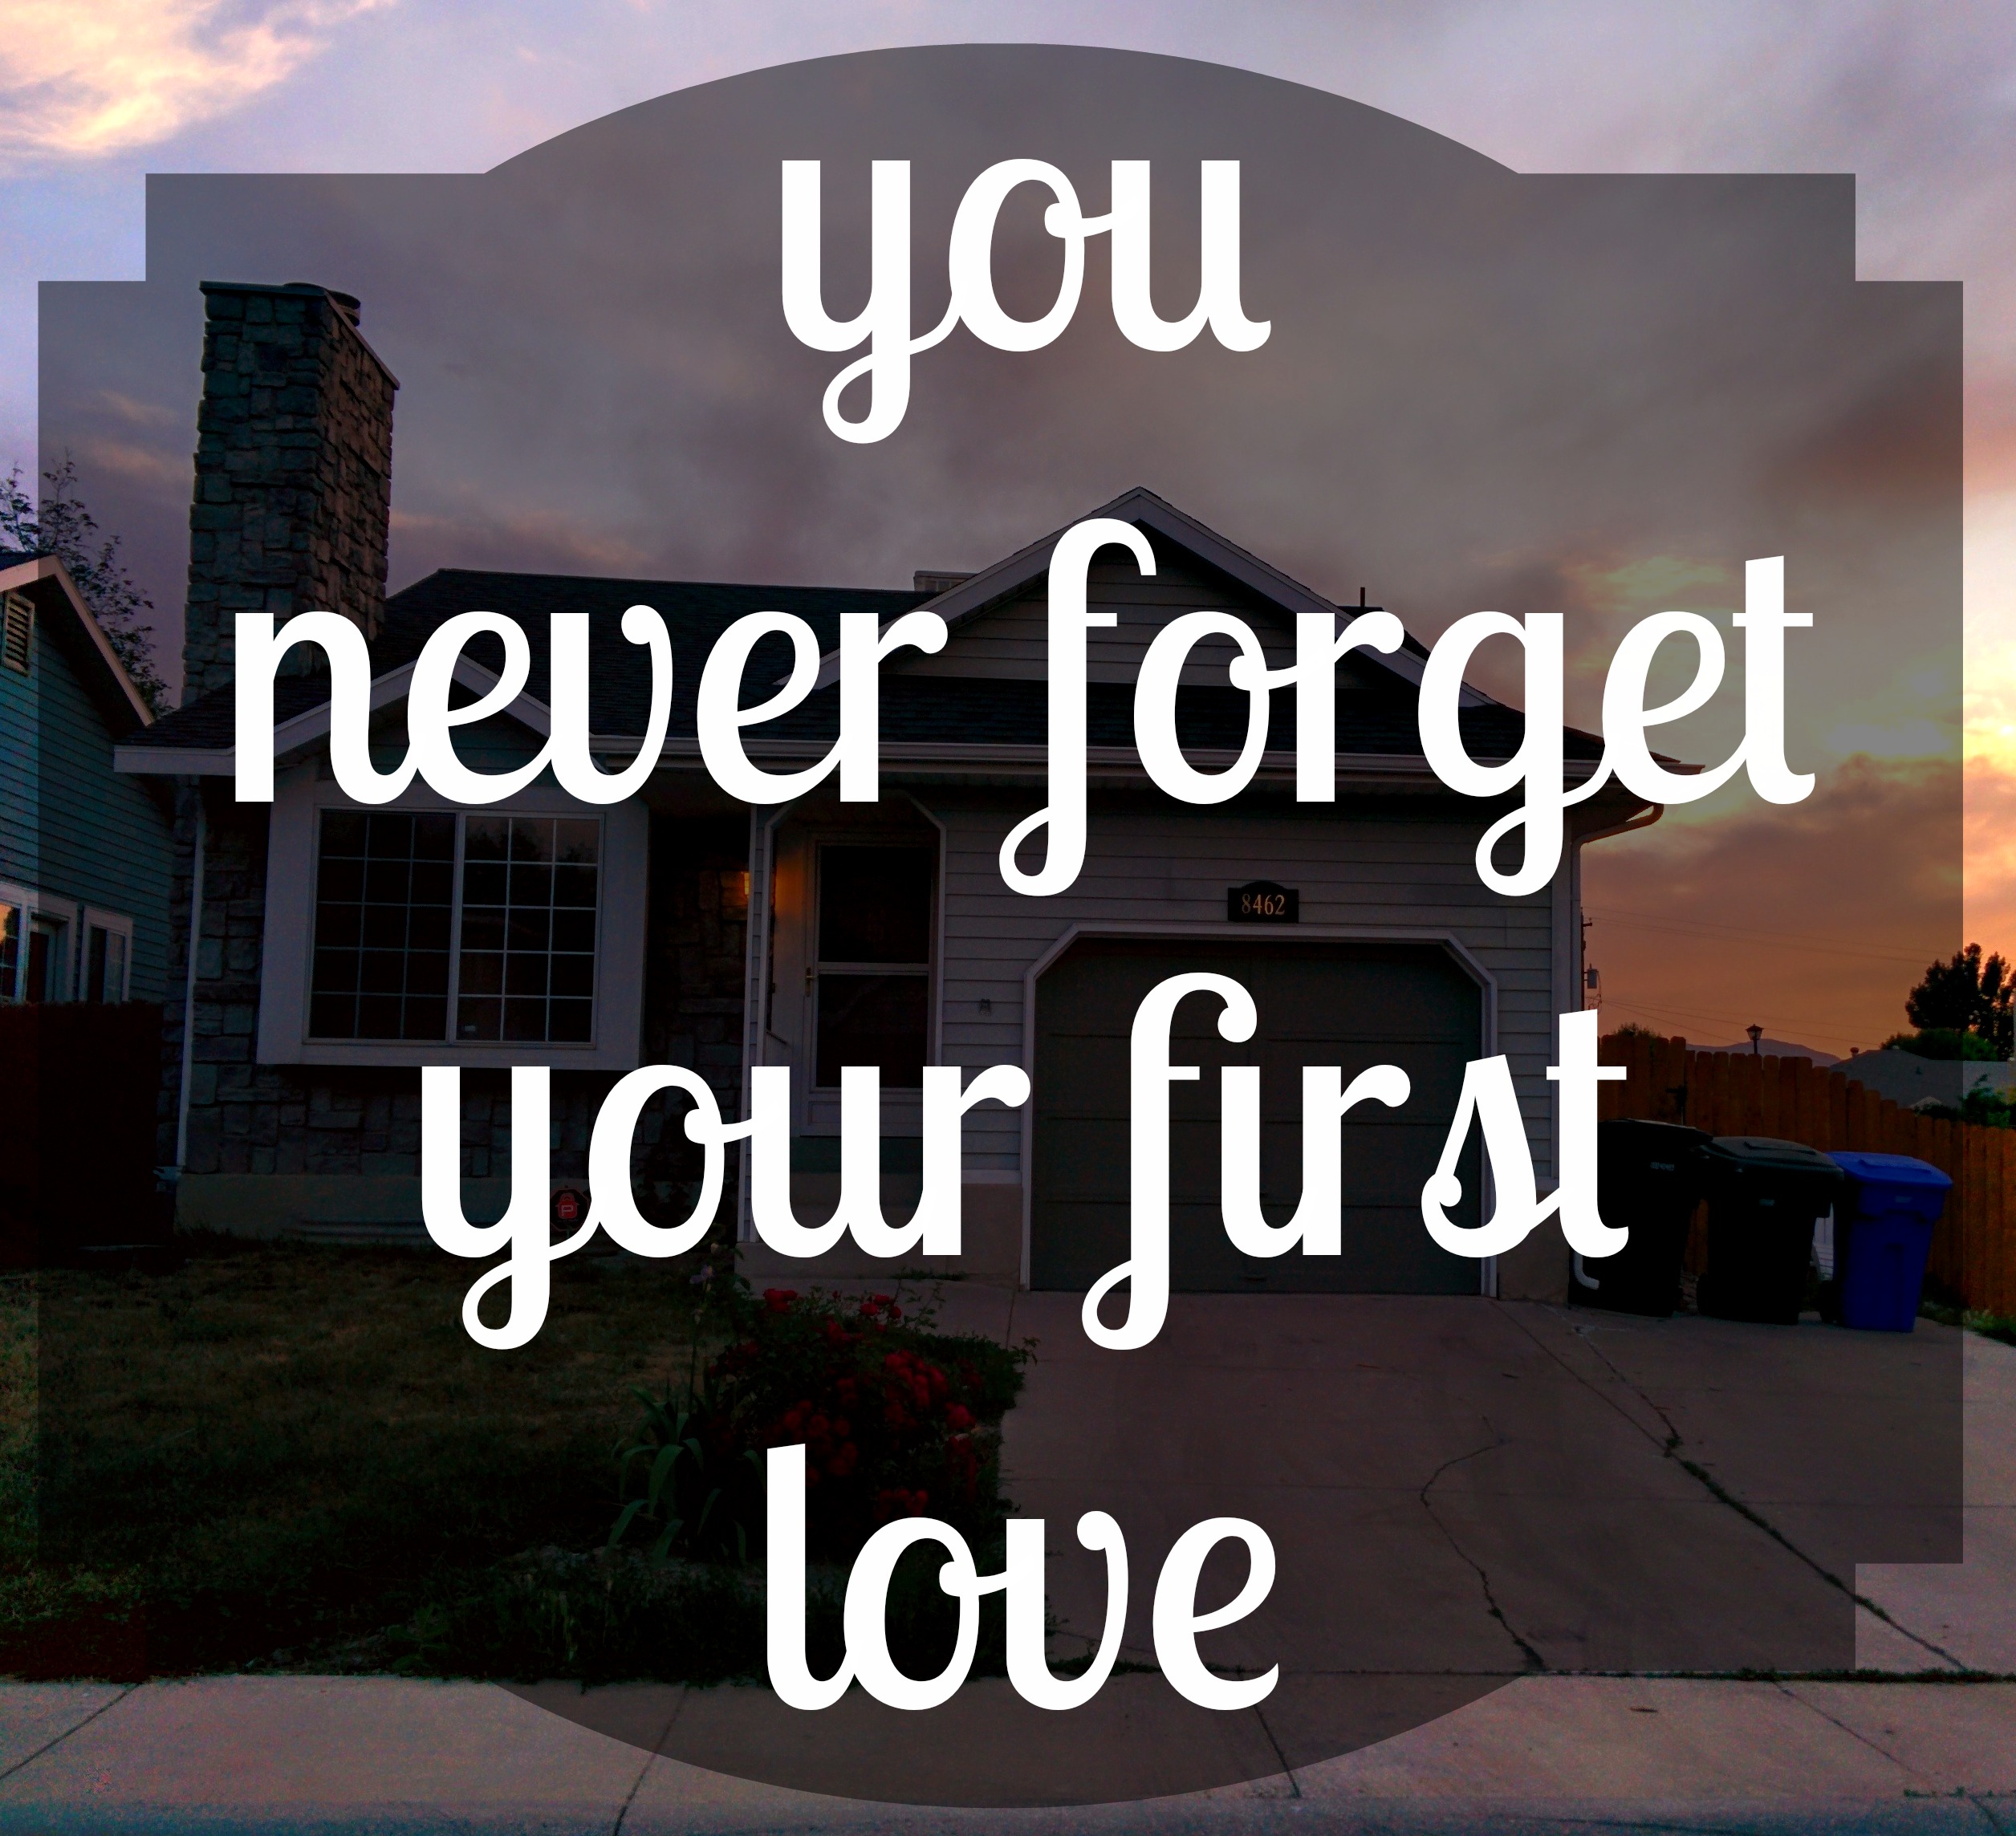 My First Love Quotes. QuotesGram